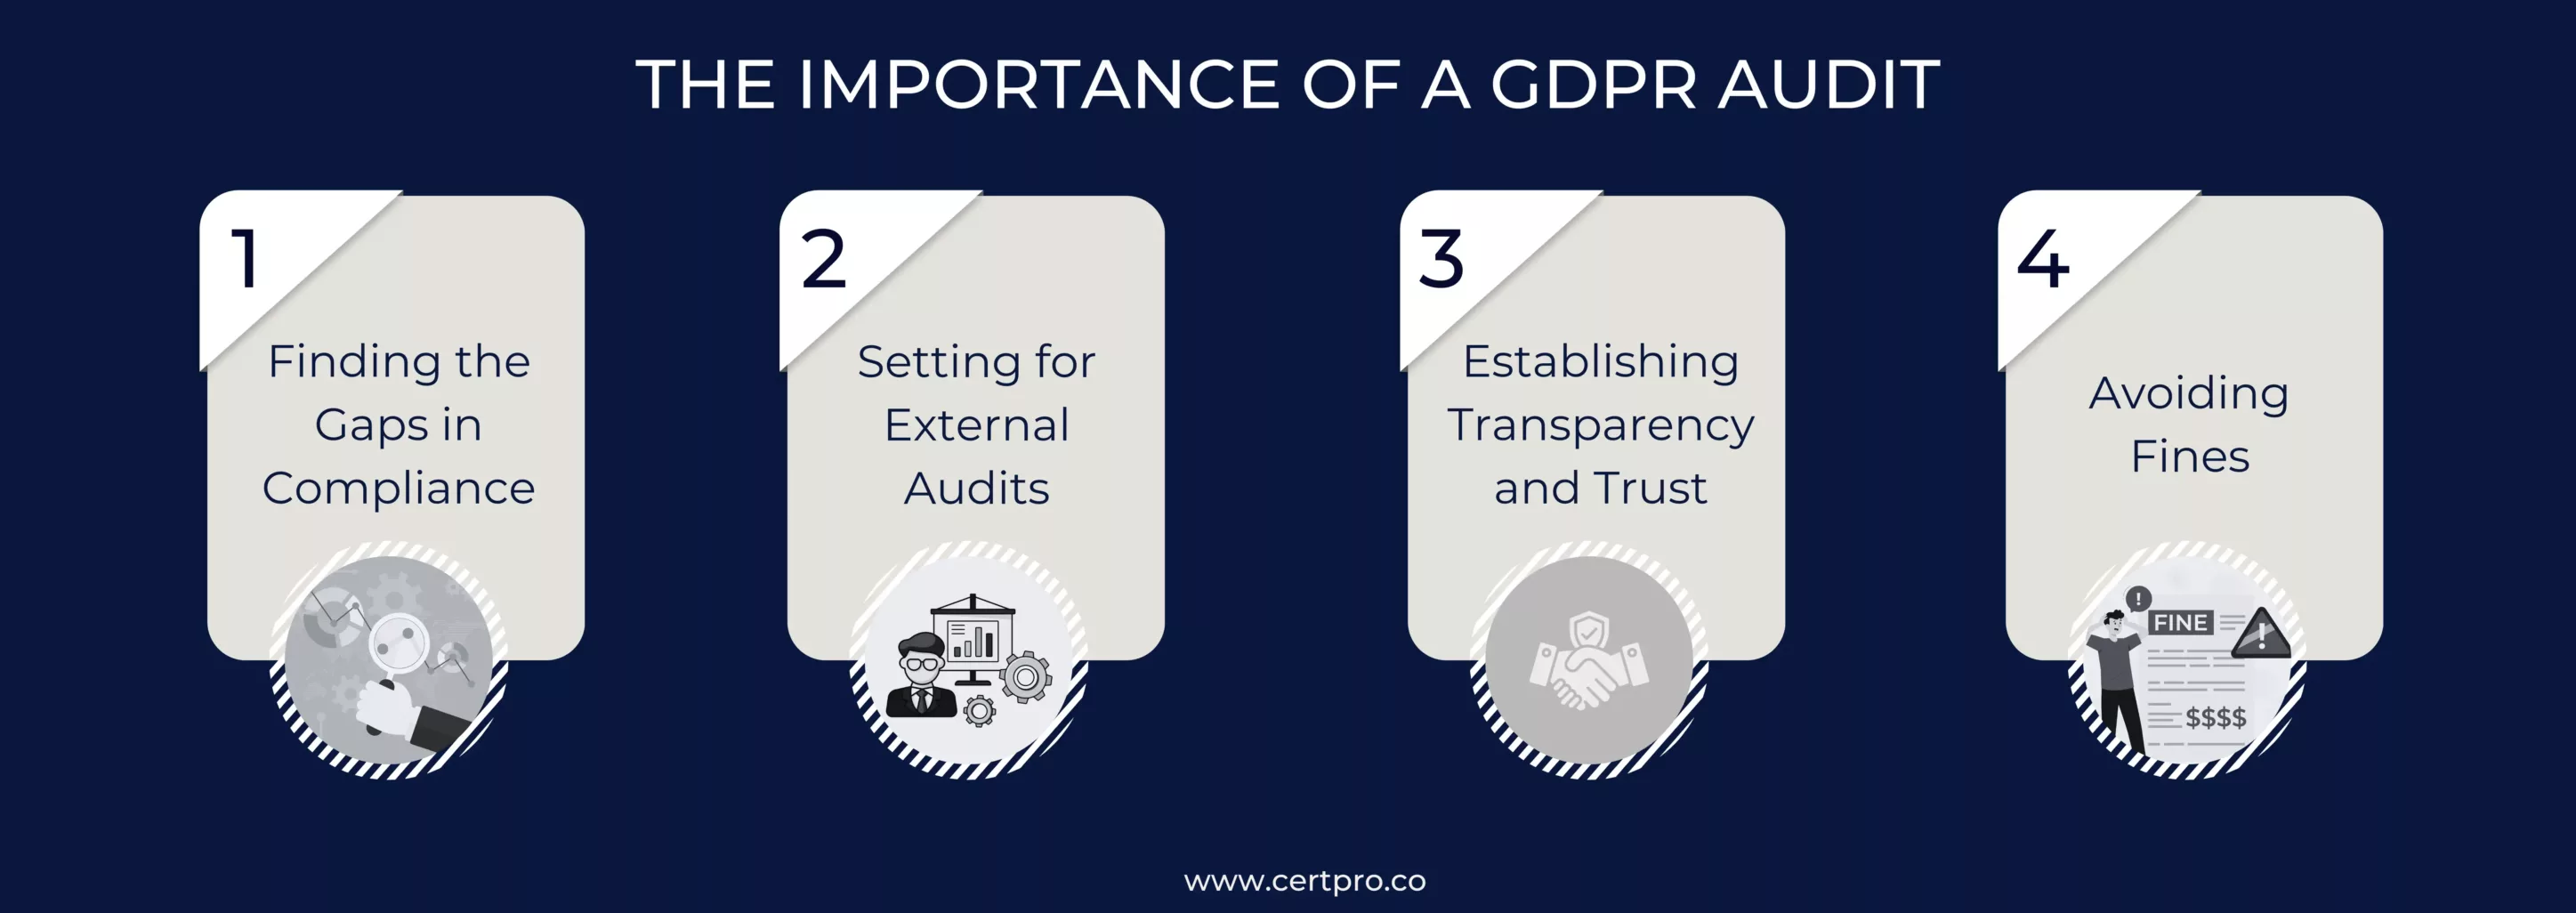 THE IMPORTANCE OF A GDPR AUDIT